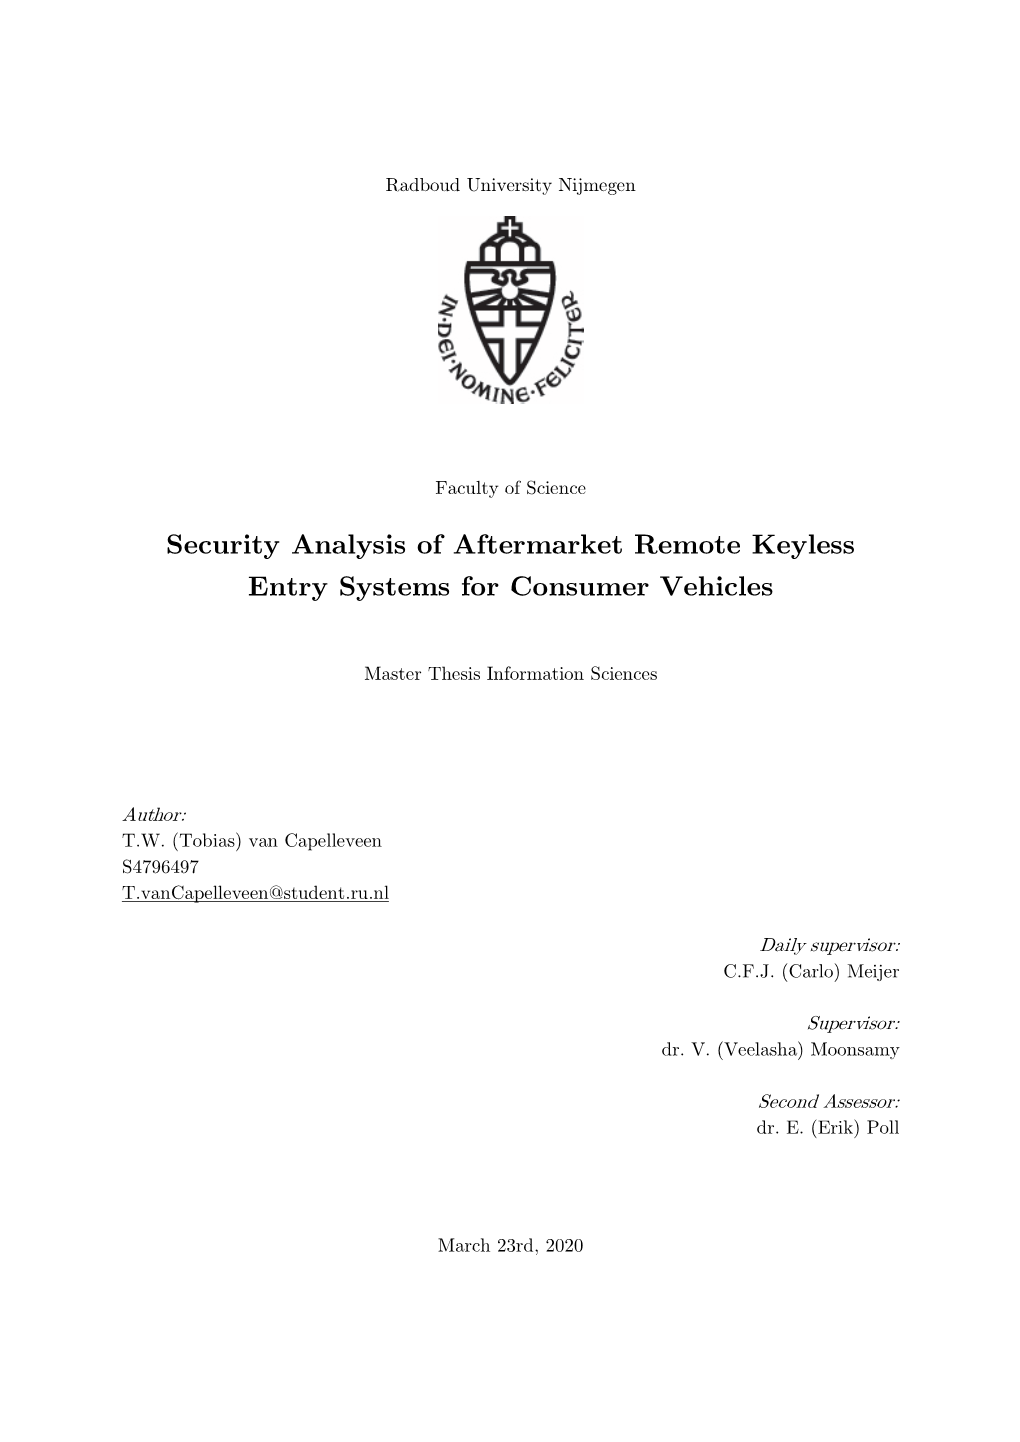 Security Analysis of Aftermarket Remote Keyless Entry Systems for Consumer Vehicles